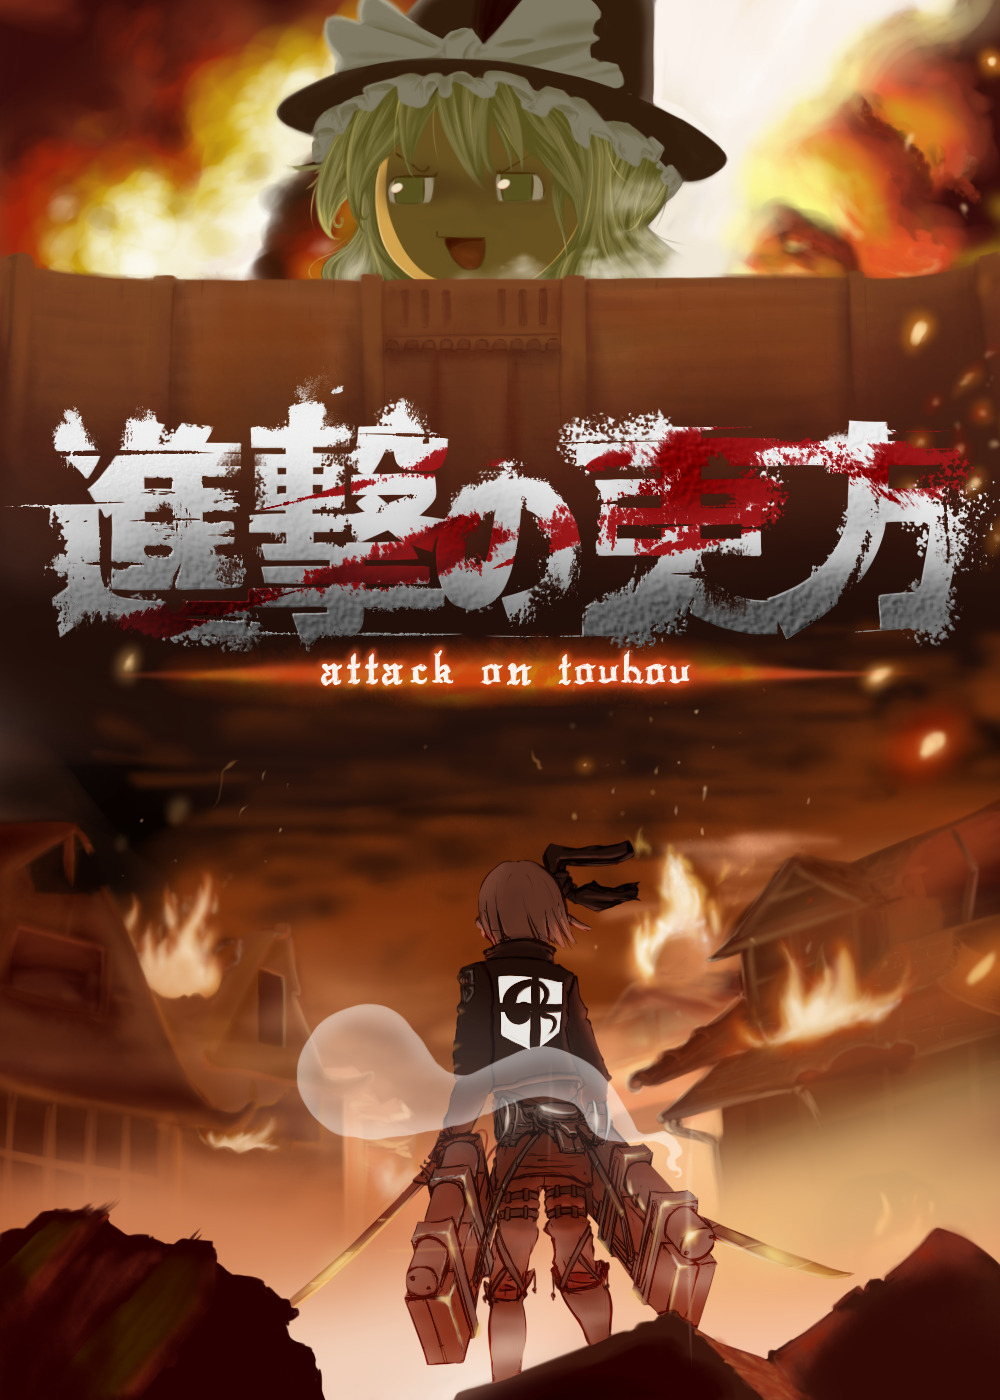 a parody of the attack on titan promo poster. youmu standing with her back towards the viewer, and a giant wall in the distance. Marisa towers over the walls. the surroundings are on fire.